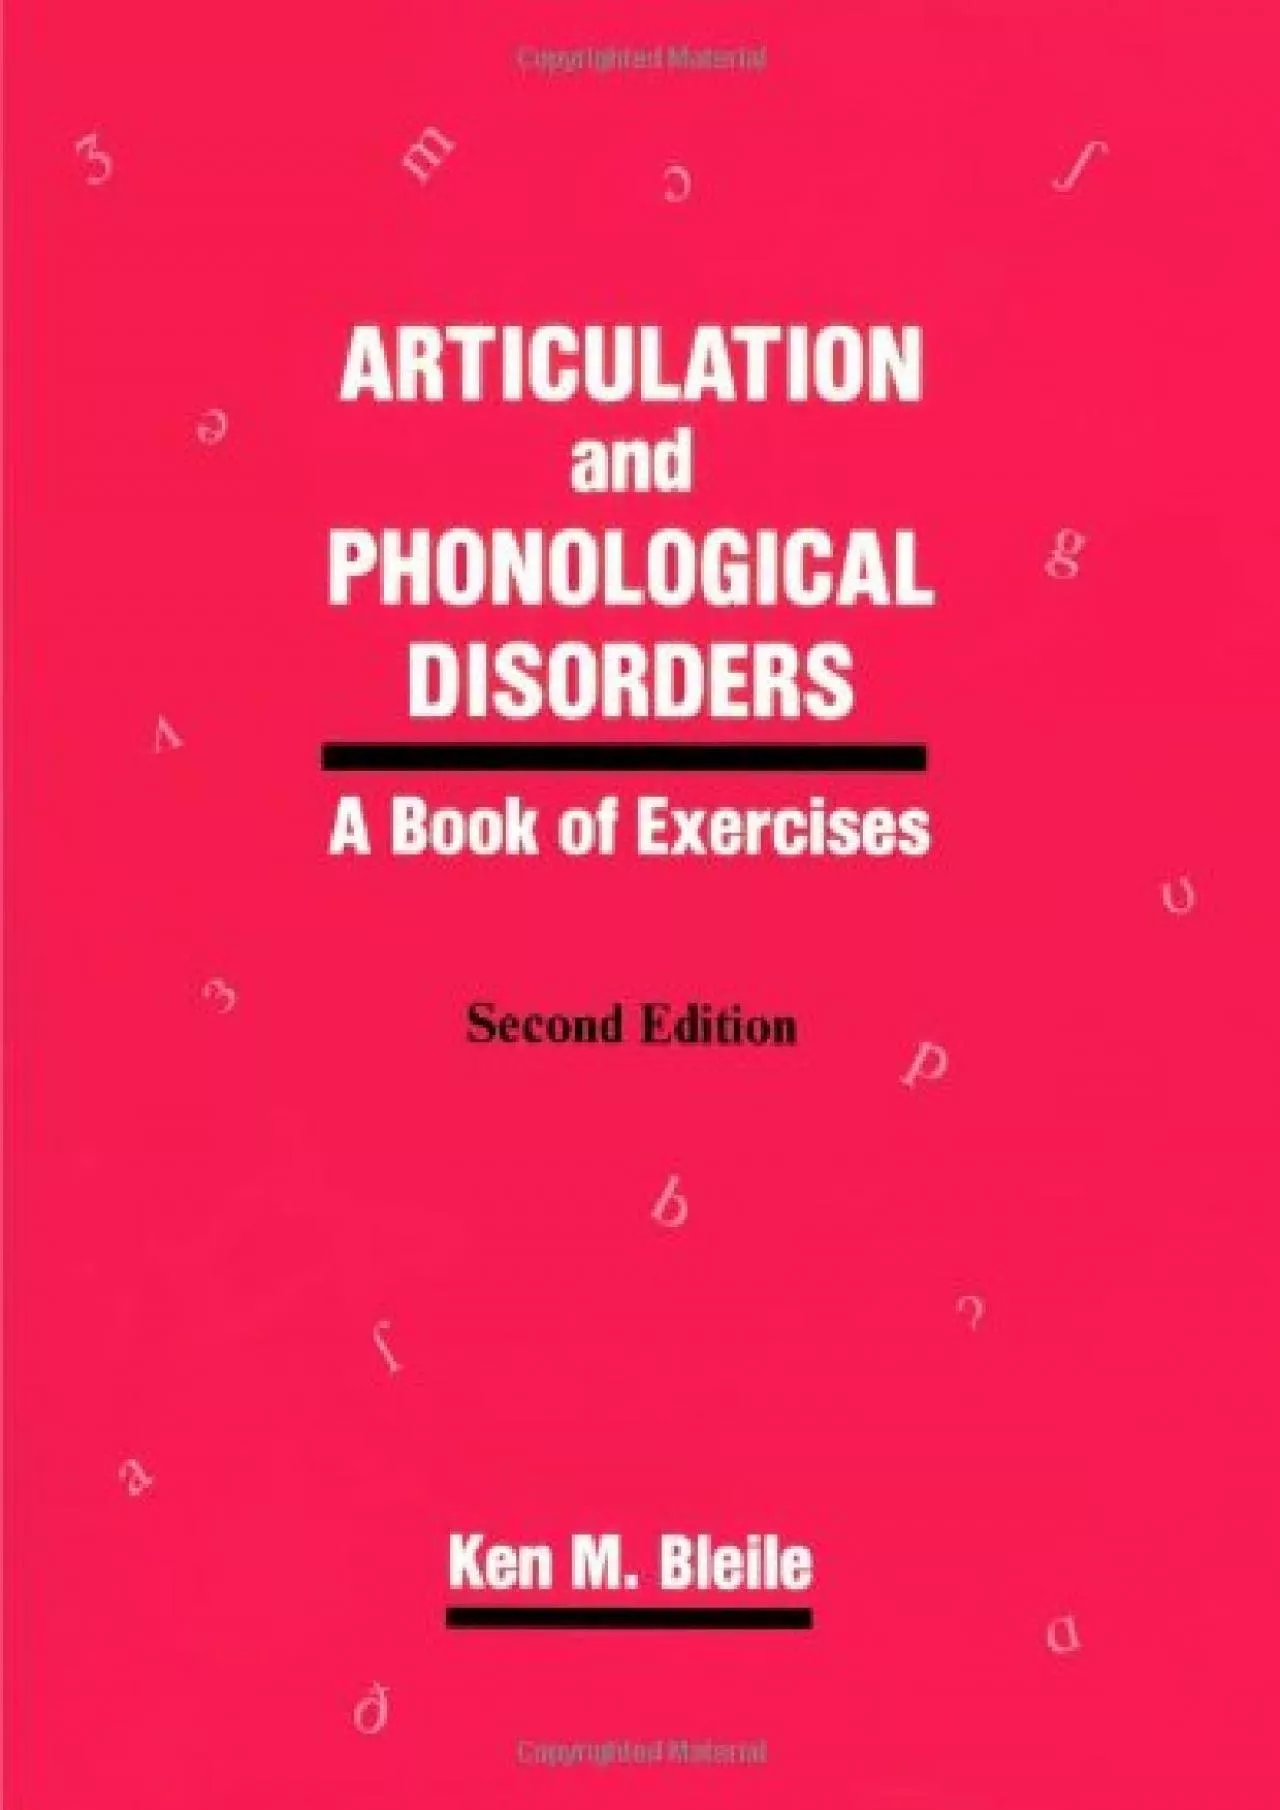 (BOOK)-Articulation & Phonological Disorders: A Book Of Exercises (Religious Contours